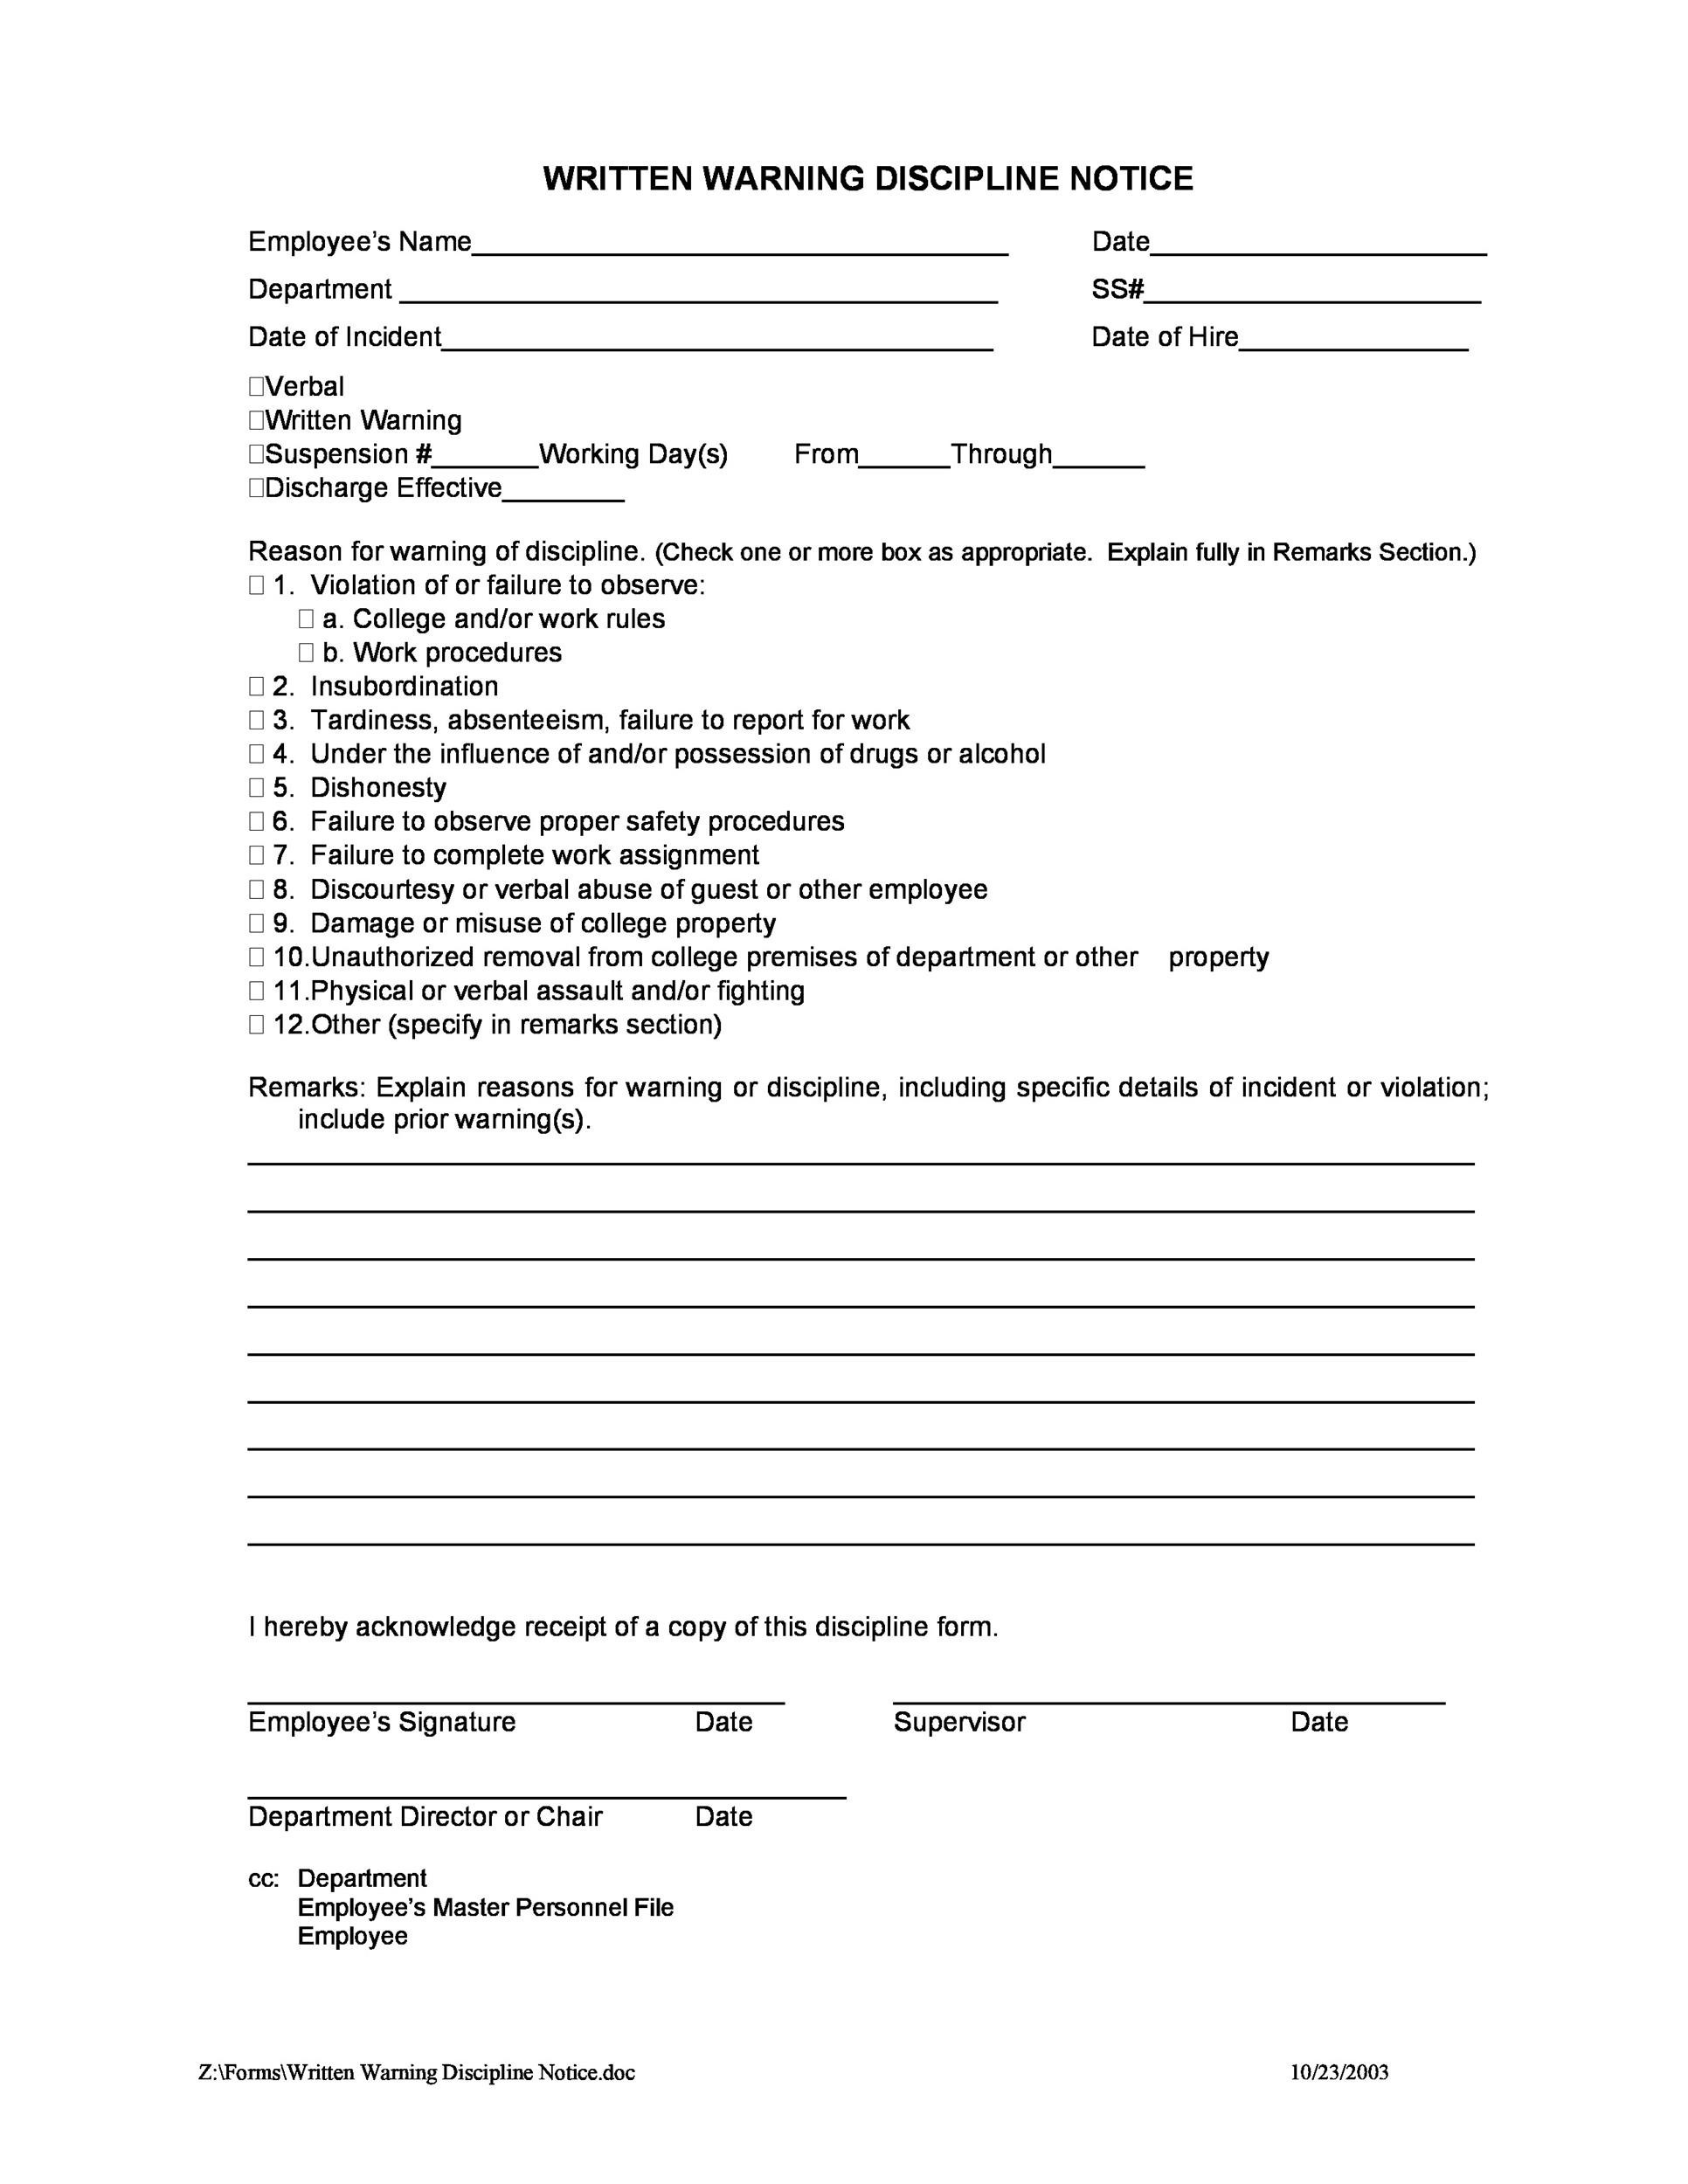 46-effective-employee-write-up-forms-disciplinary-action-forms